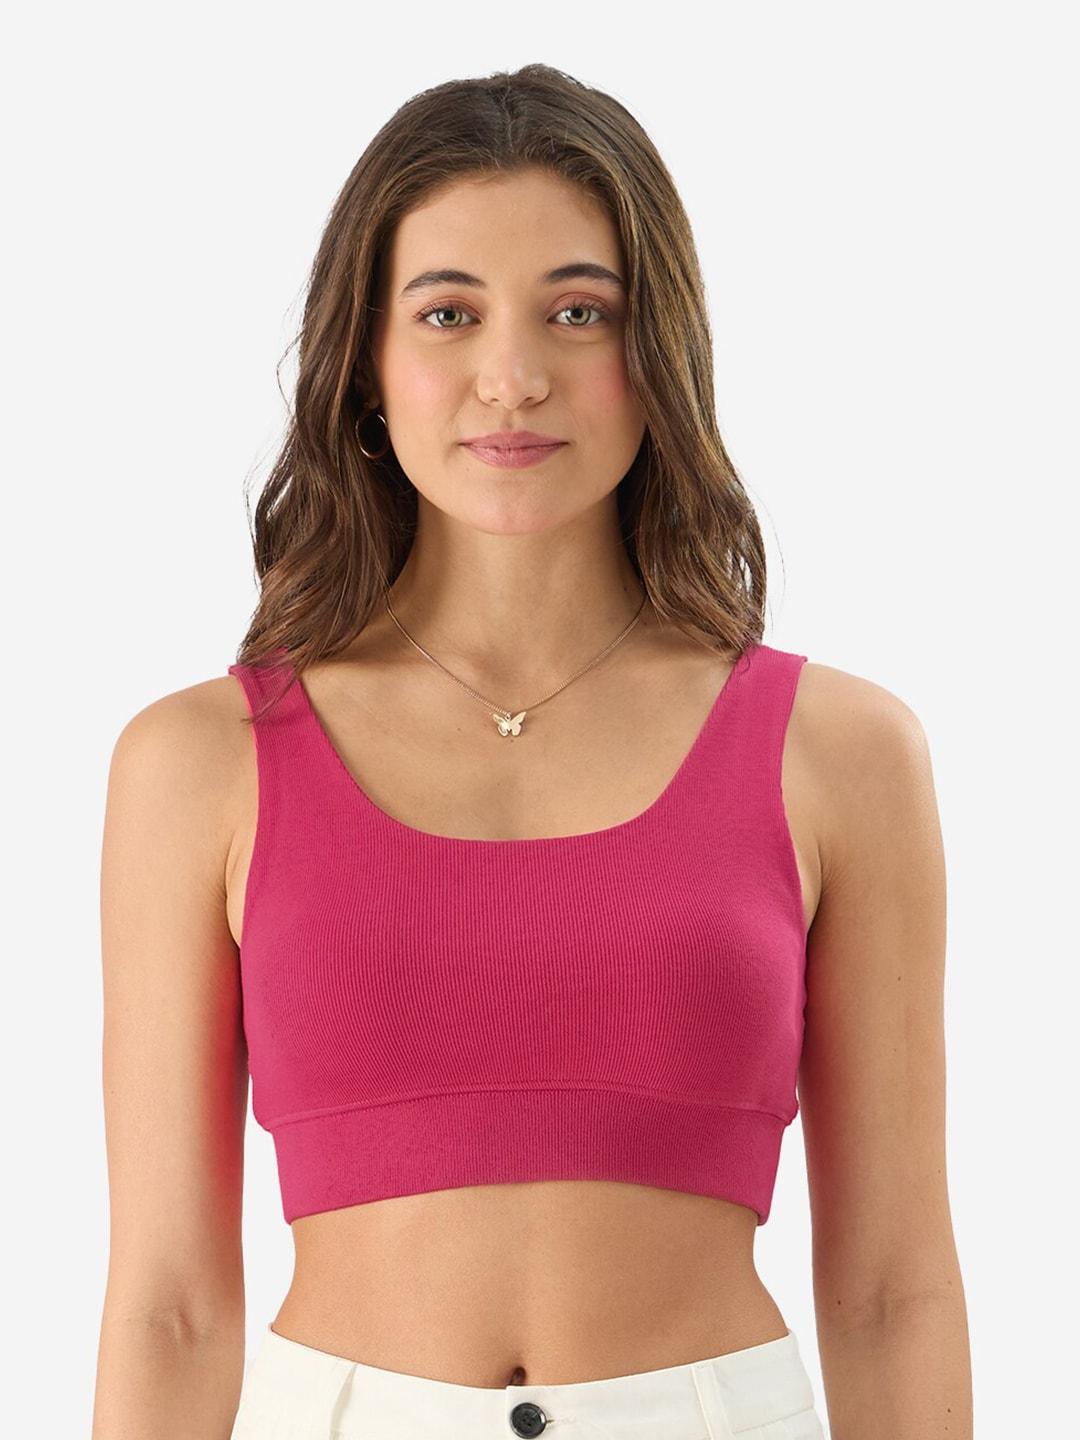 the souled store pink full coverage underwired cotton bralette bra all day comfort